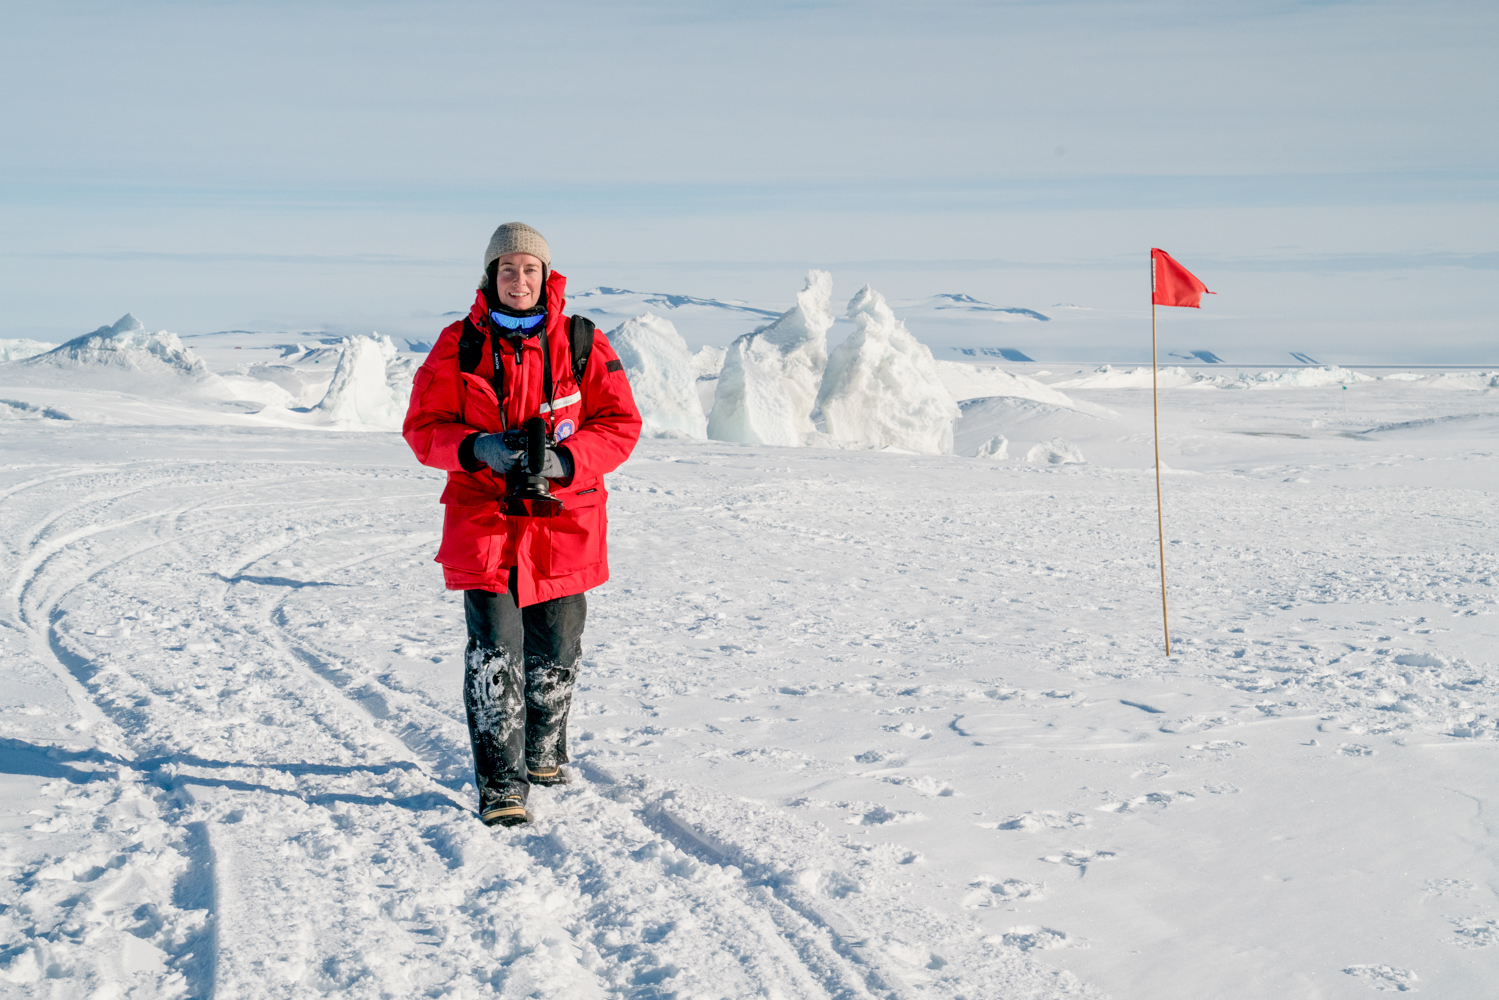 Sac State Professor Kathy Kasic holding a film camera in the icy snow of Antarctica during the filming of her documentary.